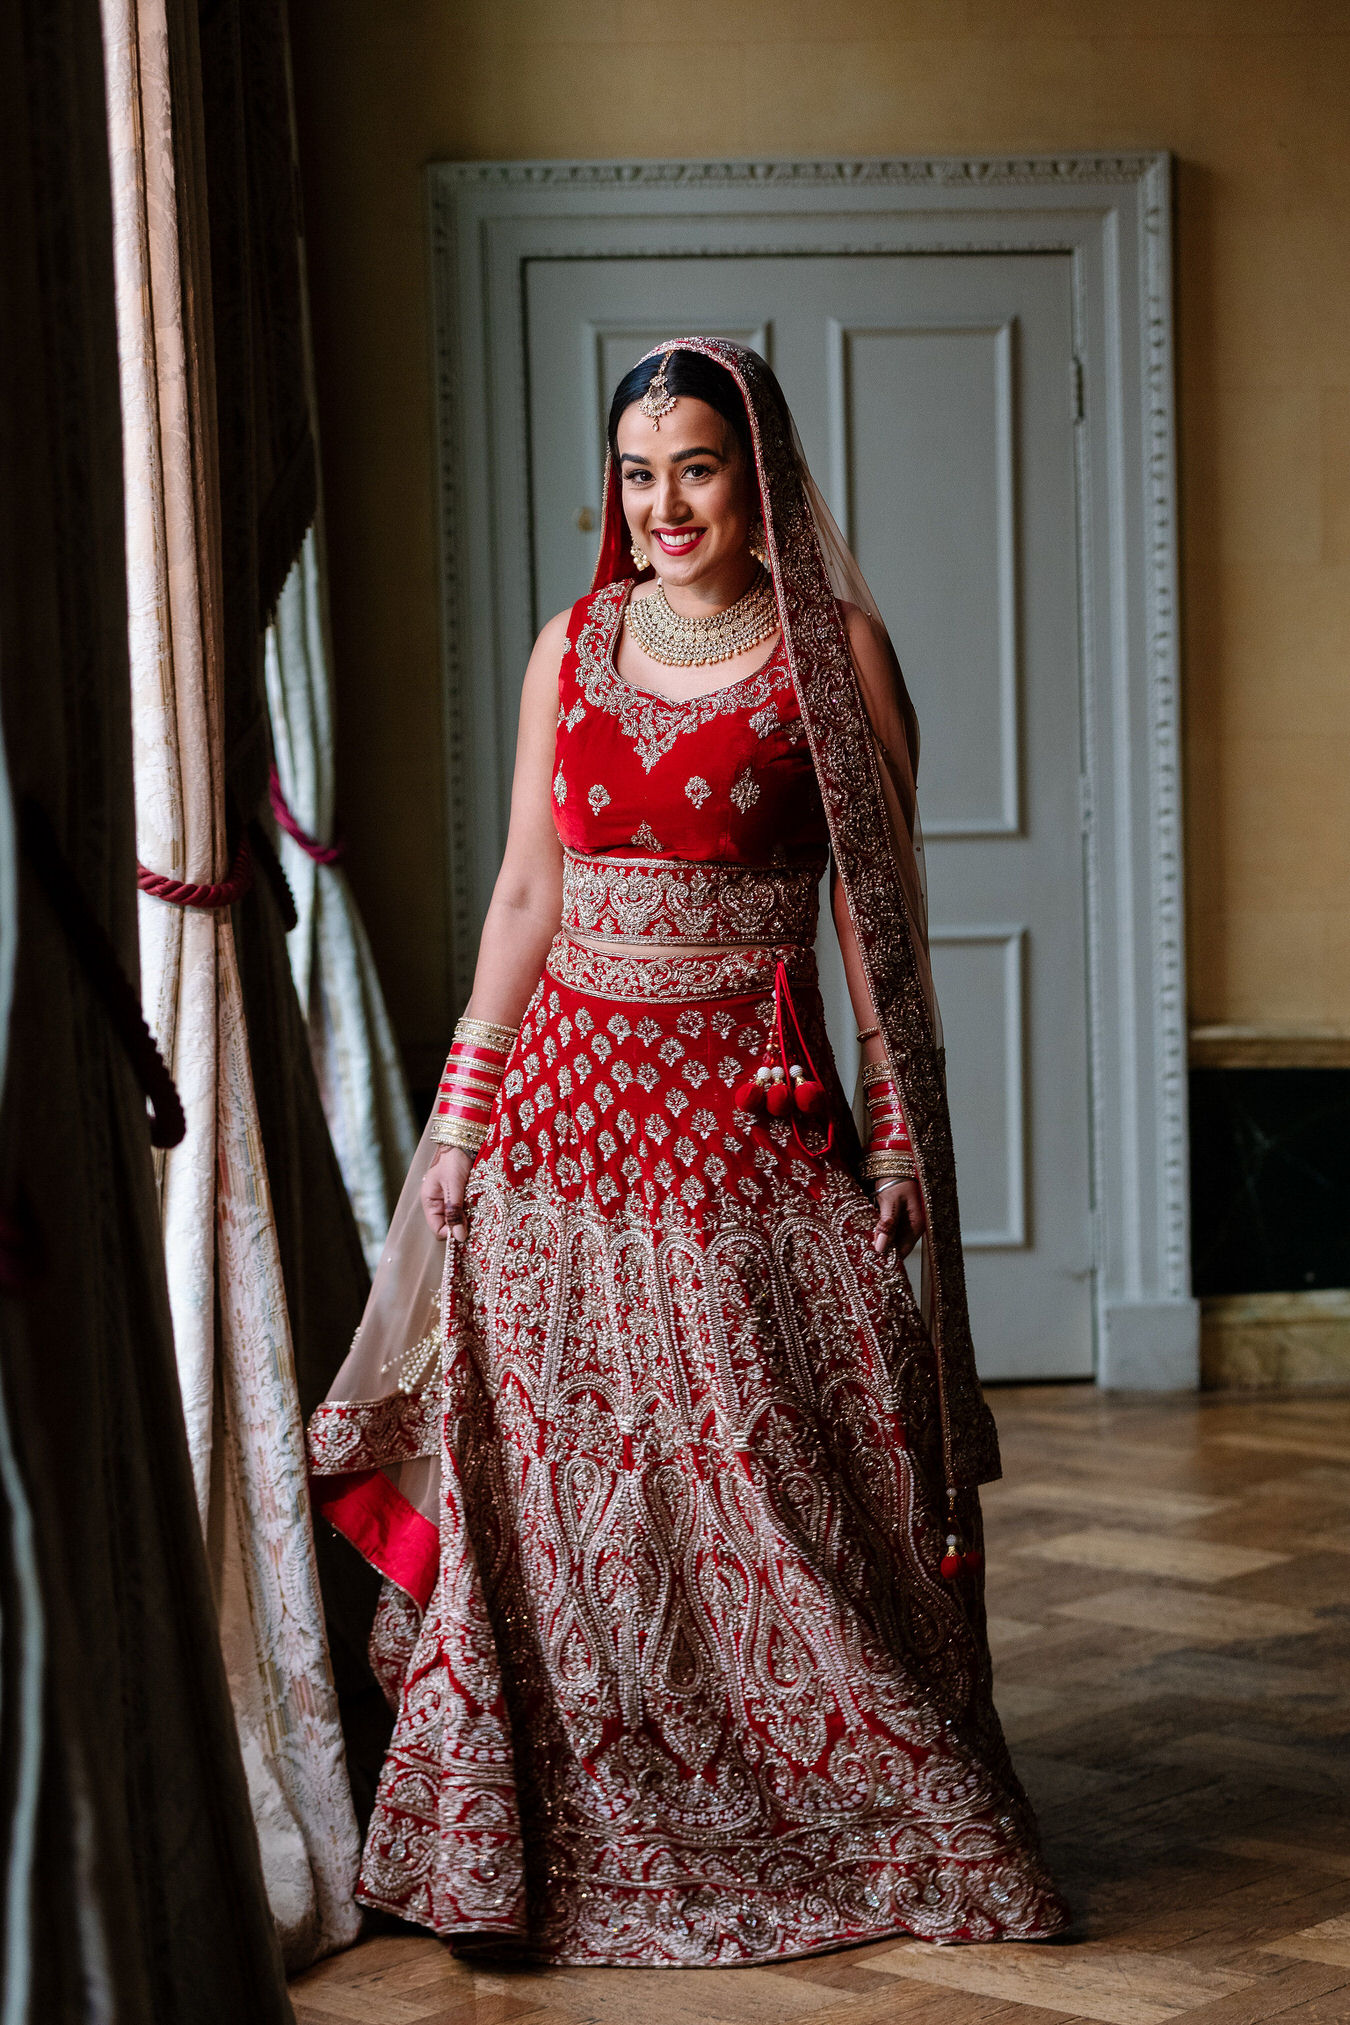 Asian Sikh bride dressed in a red bridal lehenga with golden details smiling in natural light.